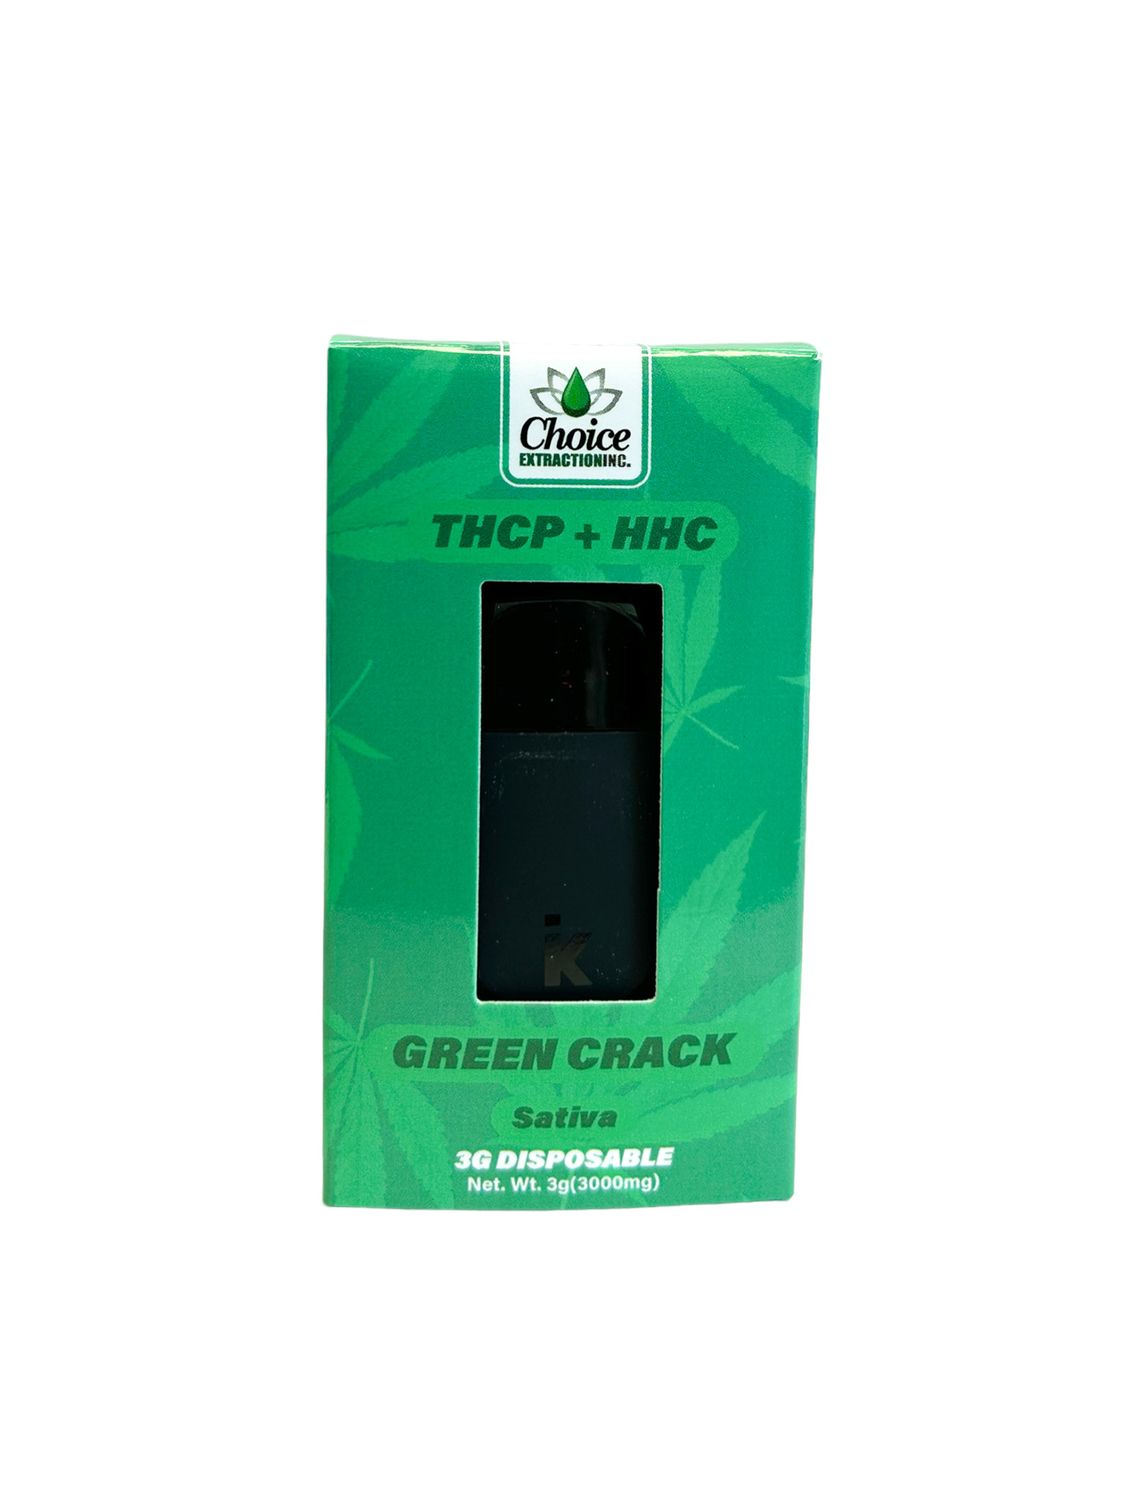 THCP + HHC Disposable - Green Crack 15mg/2400mg - 3mL - Sativa